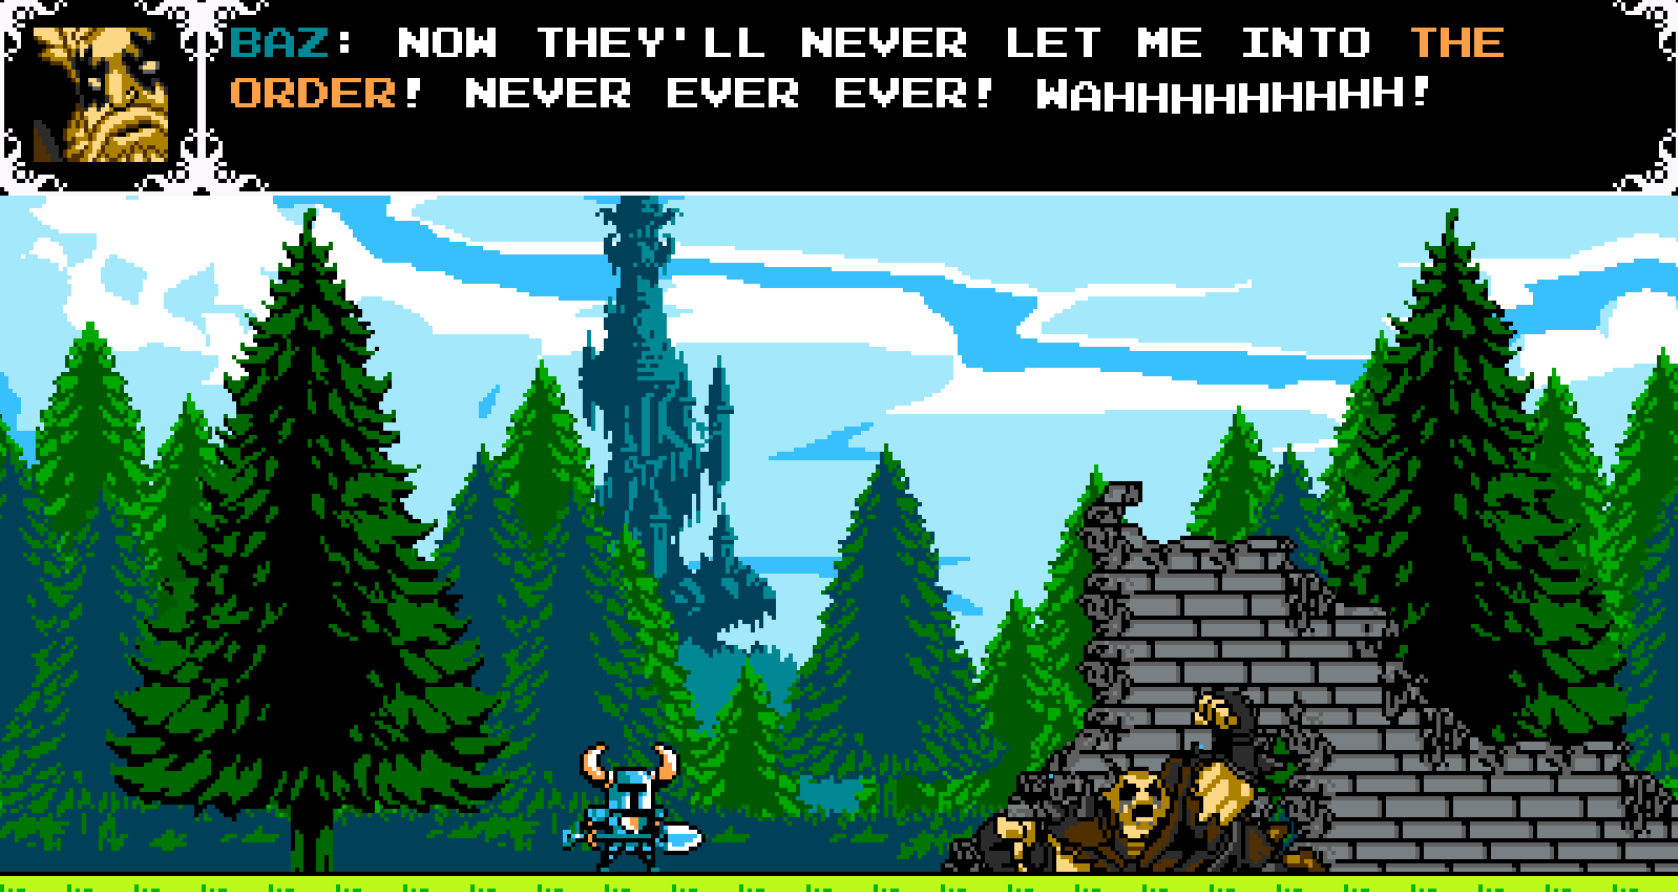 Shovel Knight's battle against Baz, one of the Wandering Travellers, might remind the player of Simon's Quest - Castlevania 2.